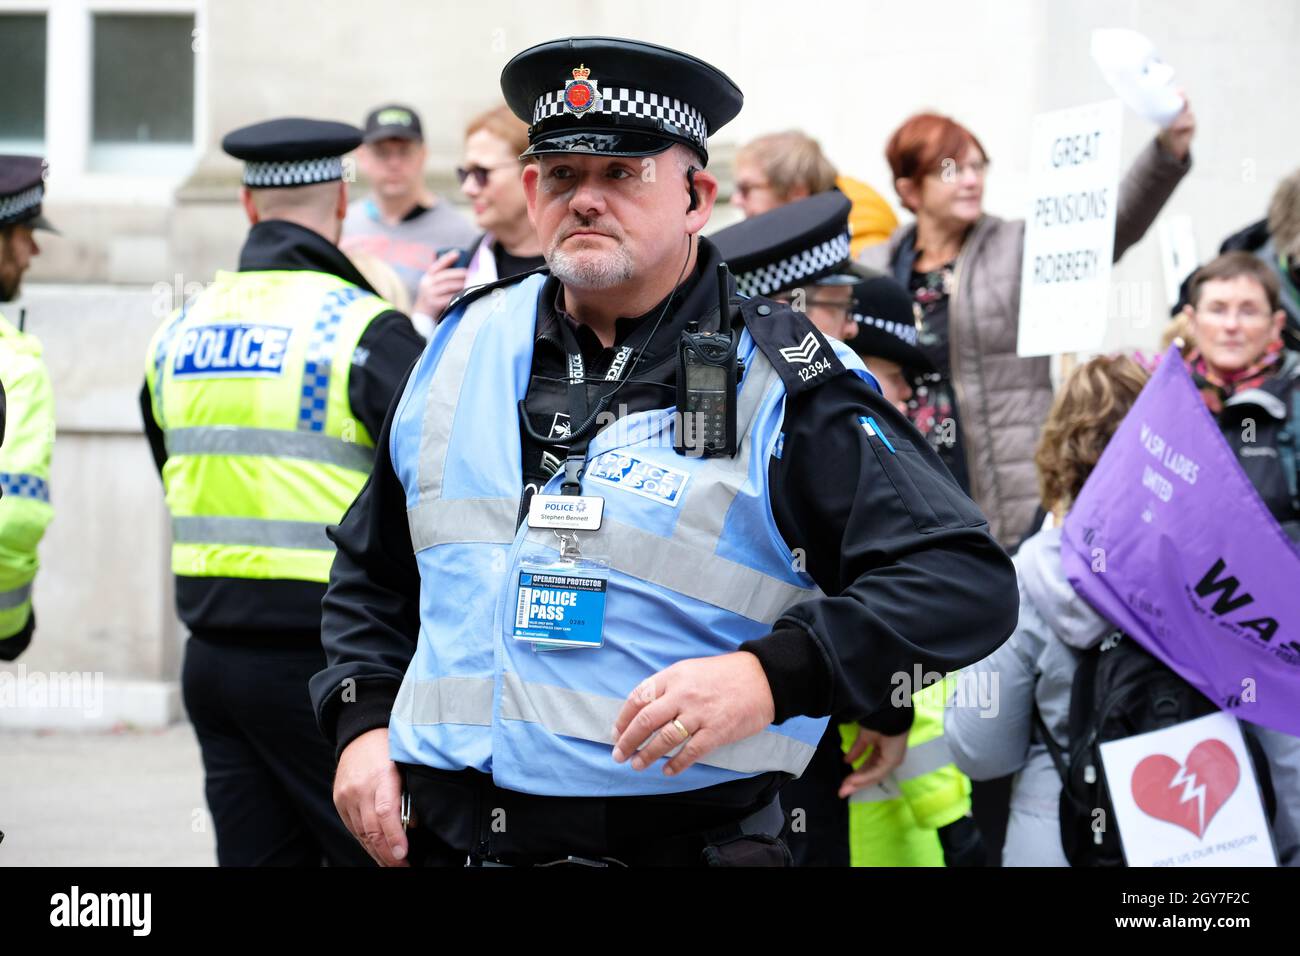 Manchester UK - Police liaison officer on duty at the Conservative Party Conference October 2021 Stock Photo